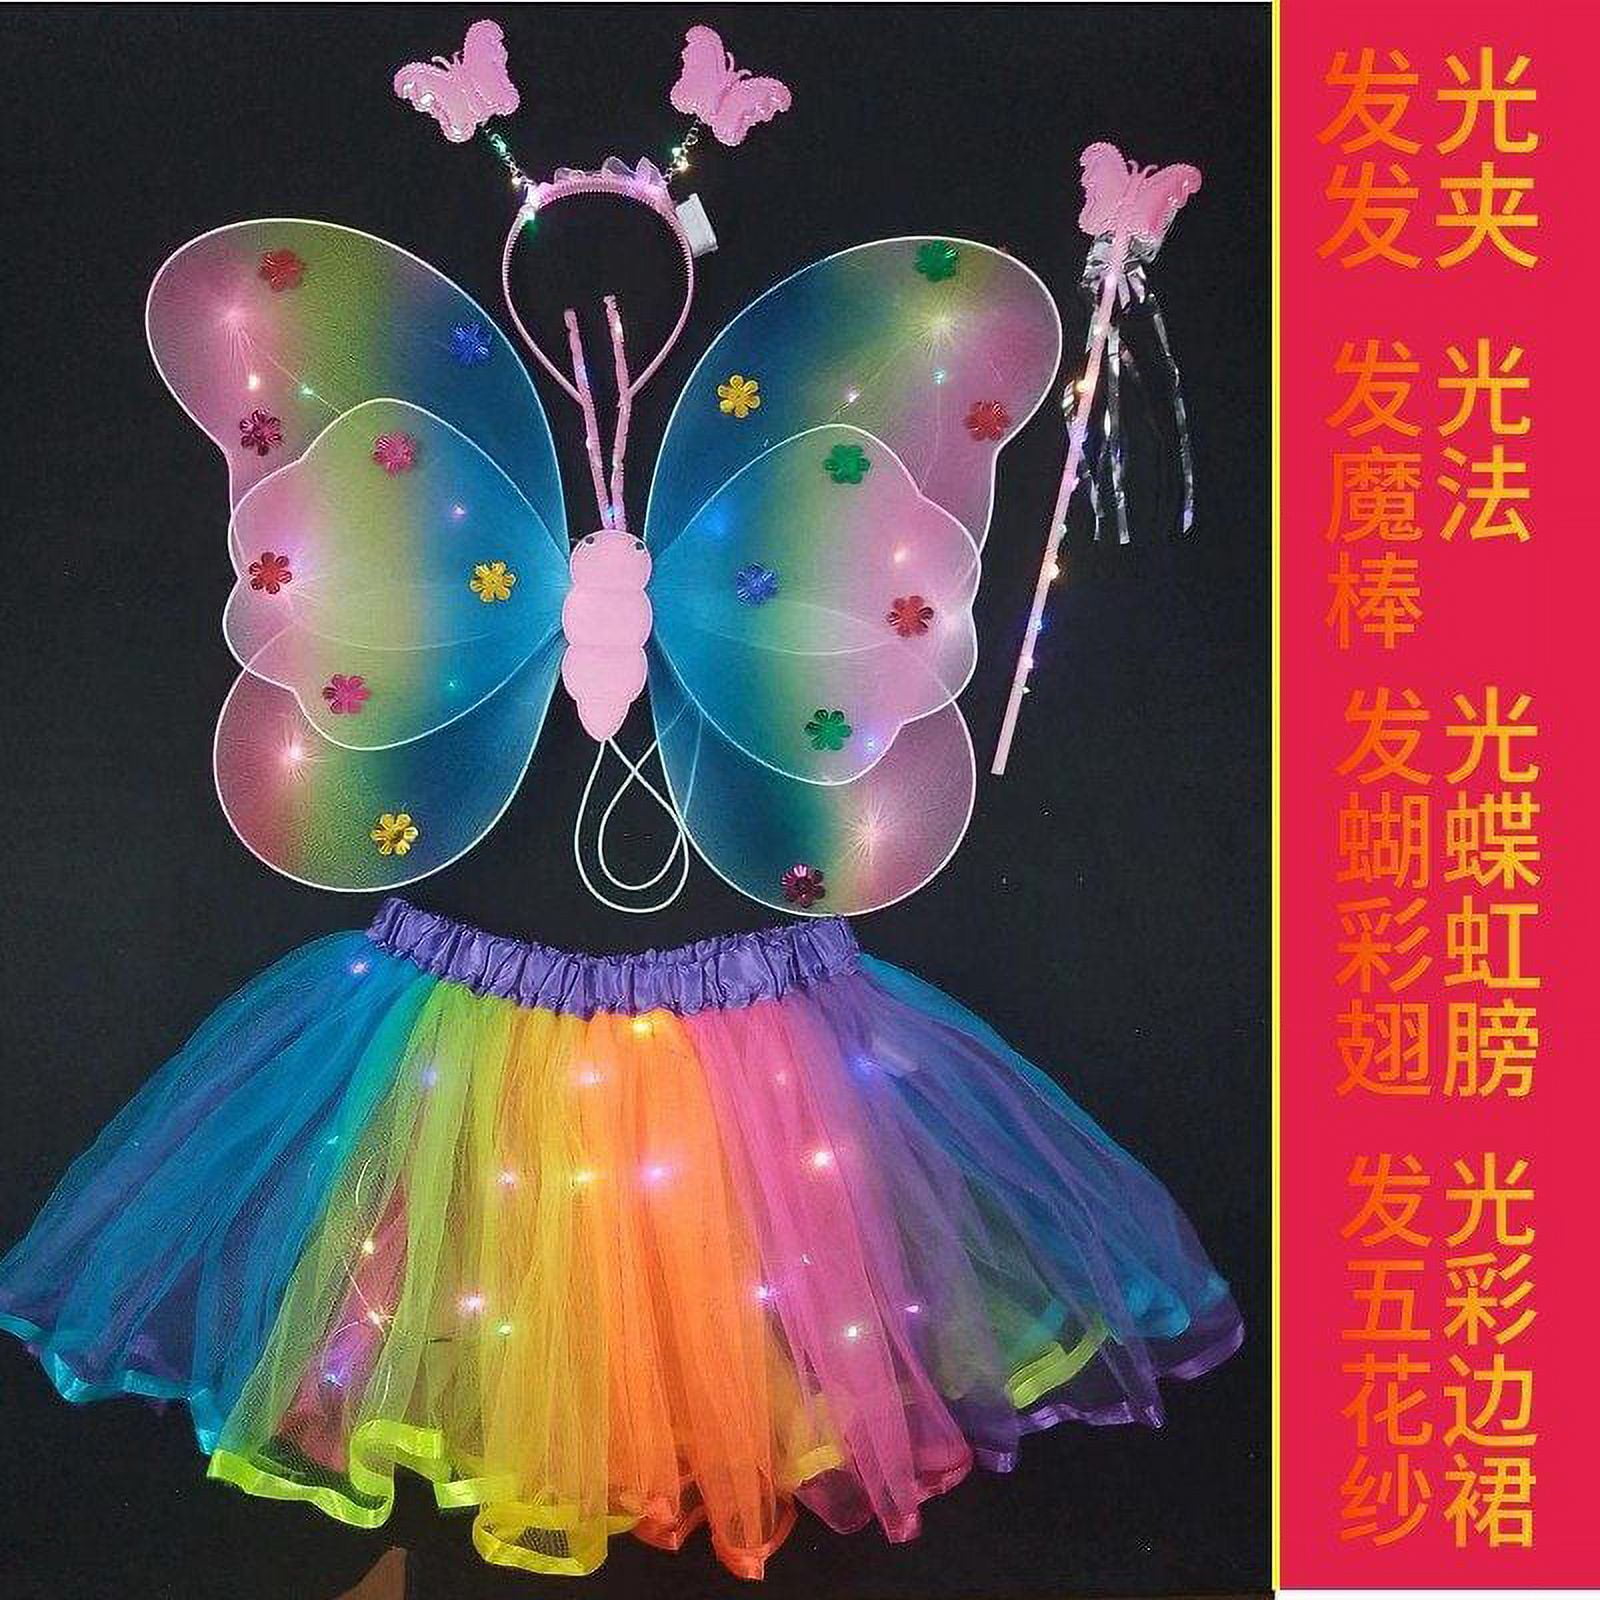 Clear Fairy Wings Set Angel Wing Accessory Girls Kids 4Pcs Floral Crown